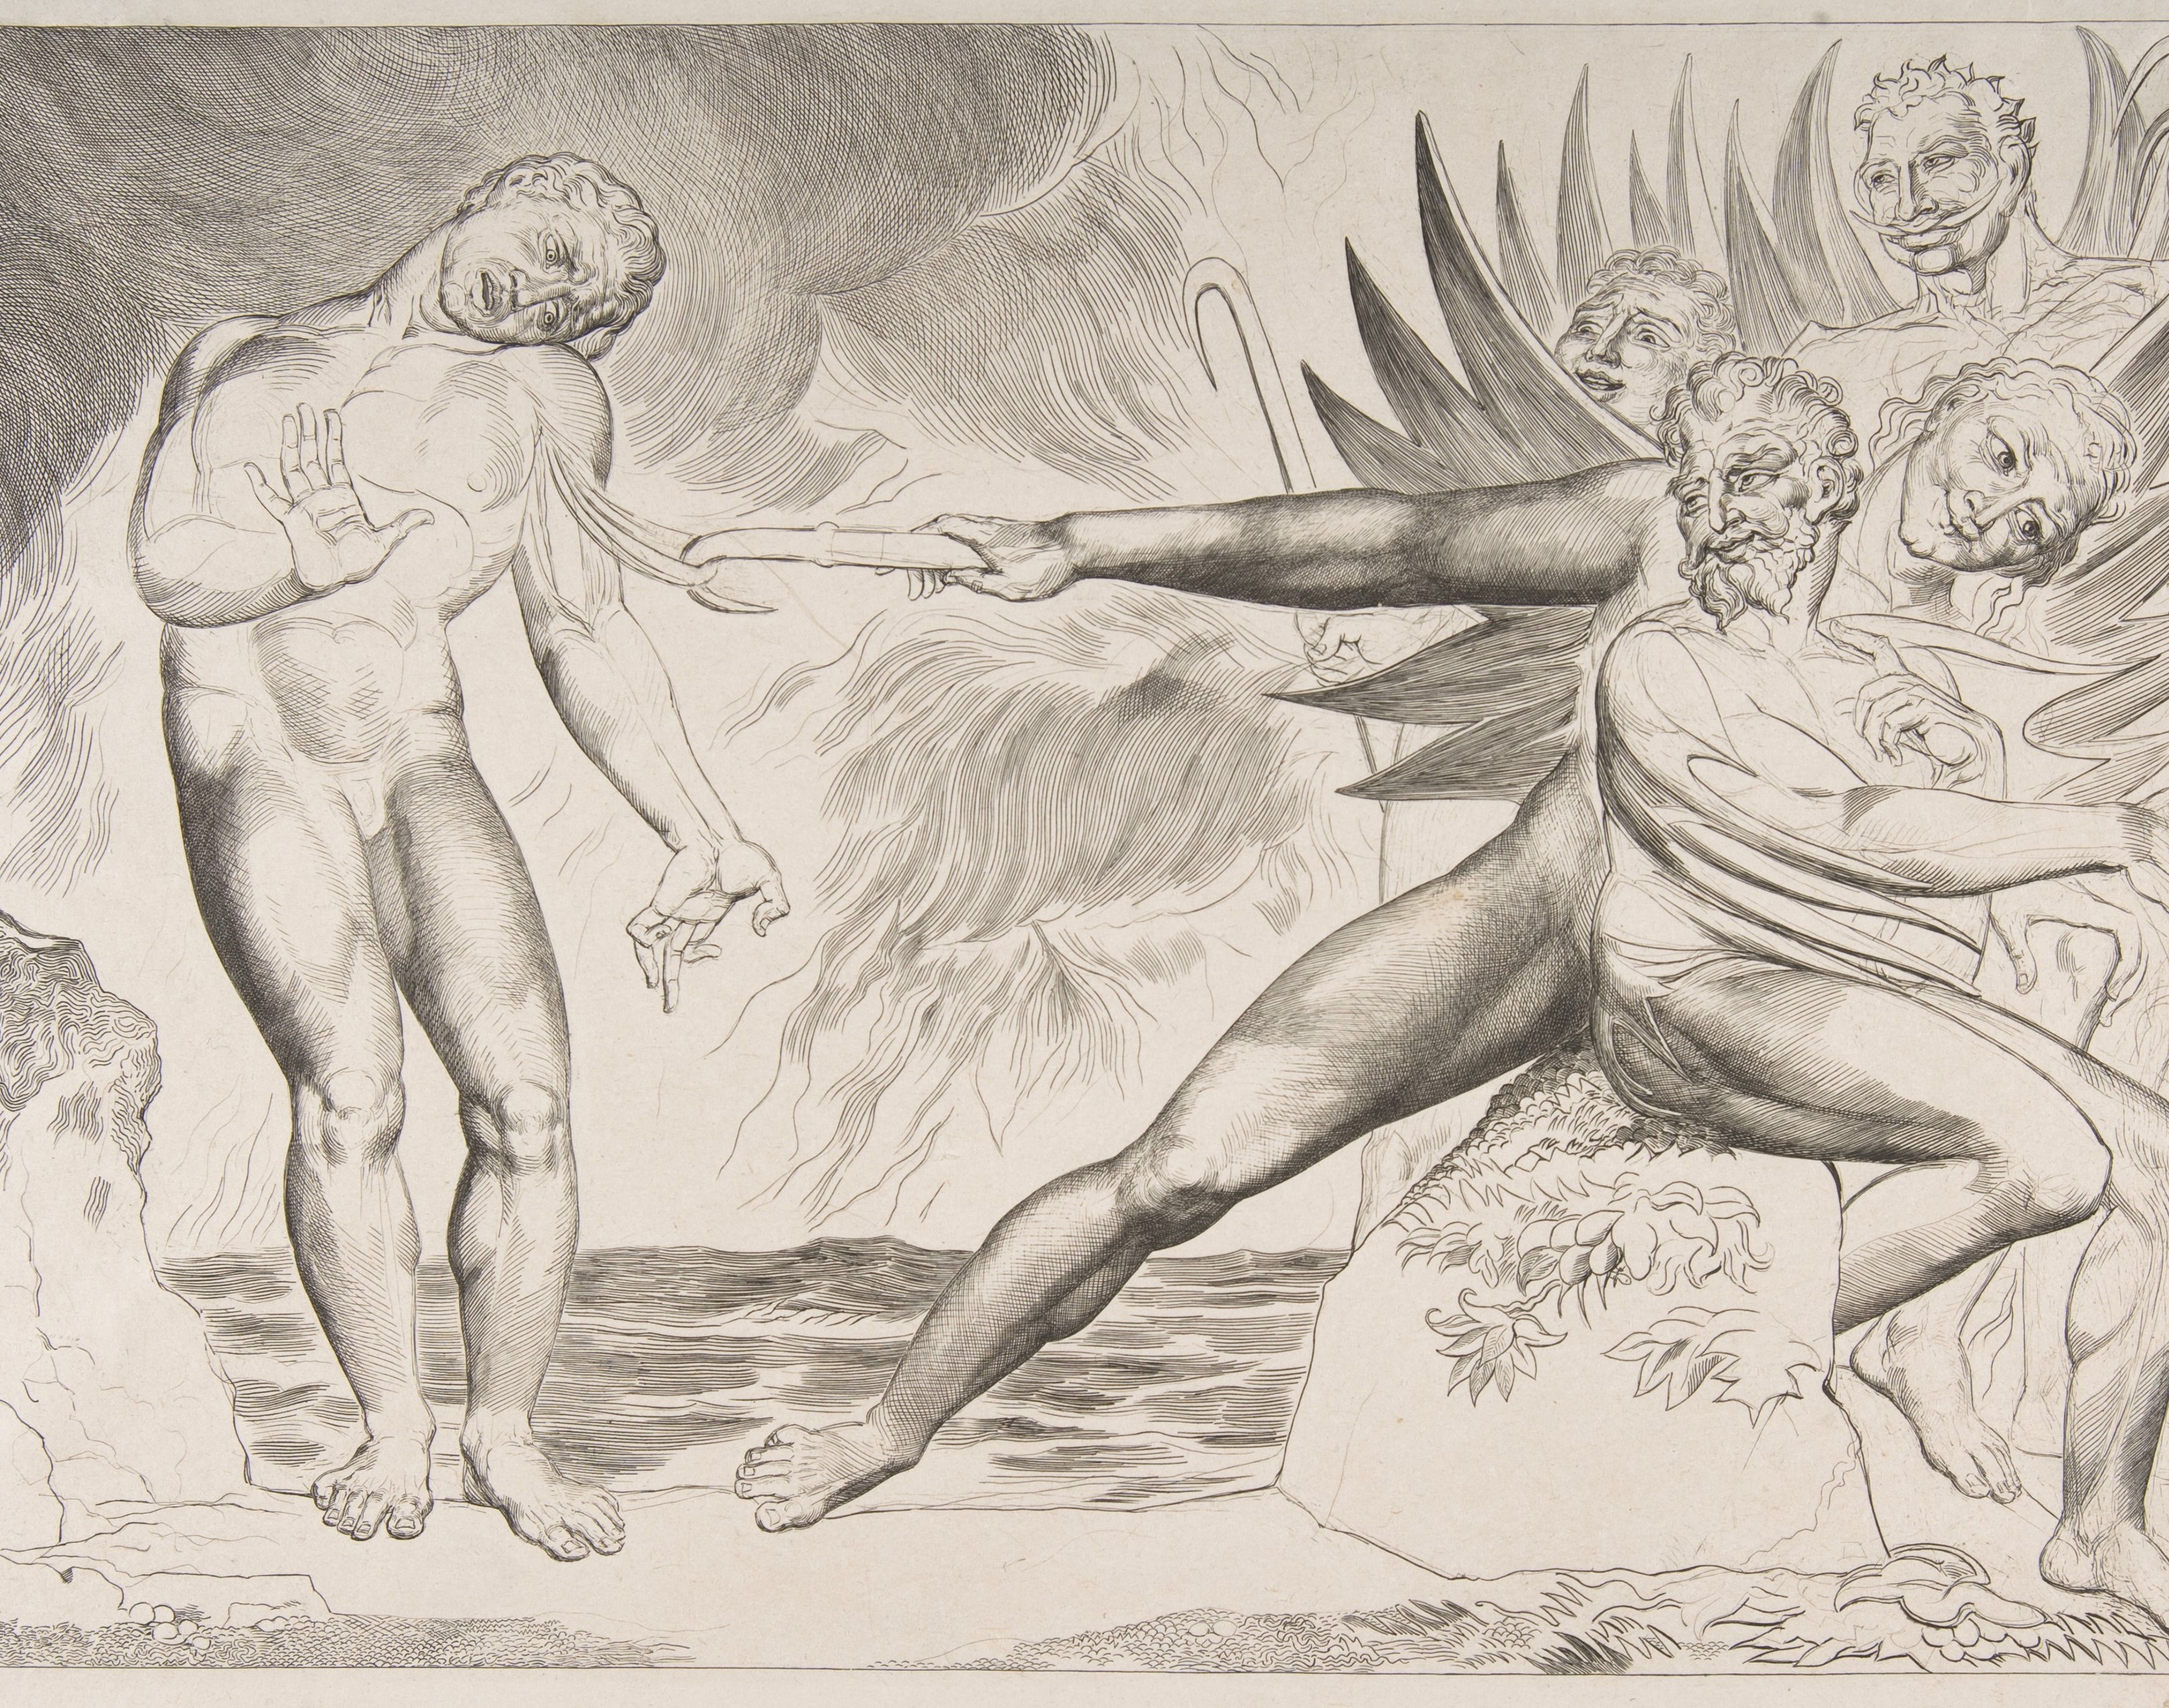 "The Circle of Corrupt Officials: The Devils Tormenting Ciampolo," engraving by William Blake, ca. 1825–27 (Metropolitan Museum of Art/Rogers Fund, 1917)